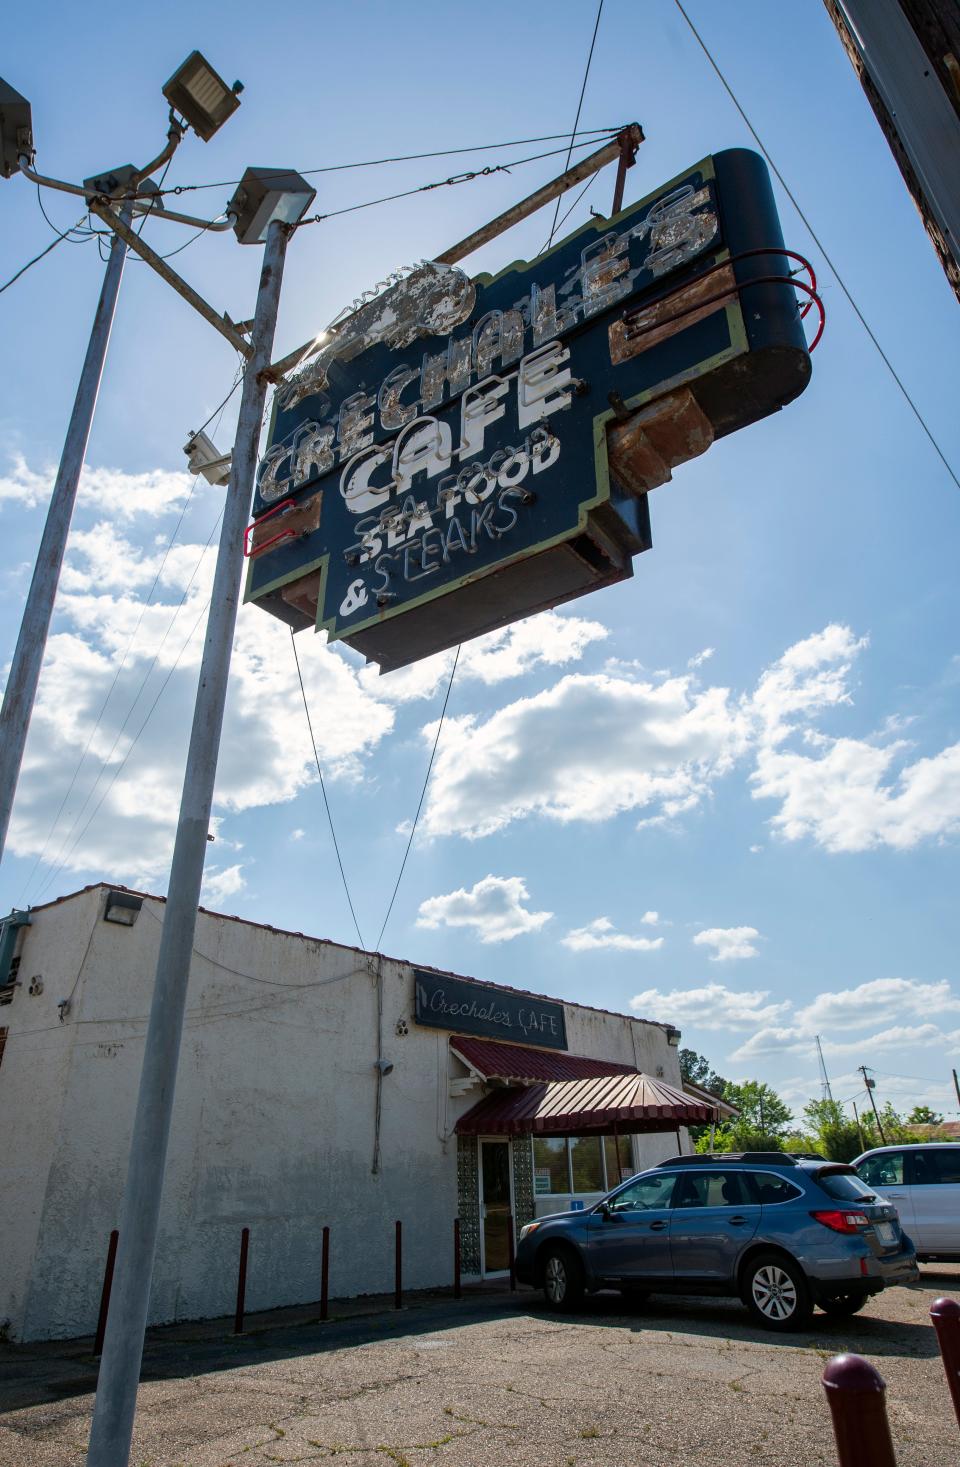 Crechale's, a family-owned and operated Jackson restaurant since 1956, is still serving up some of the best steaks and seafood in the city.